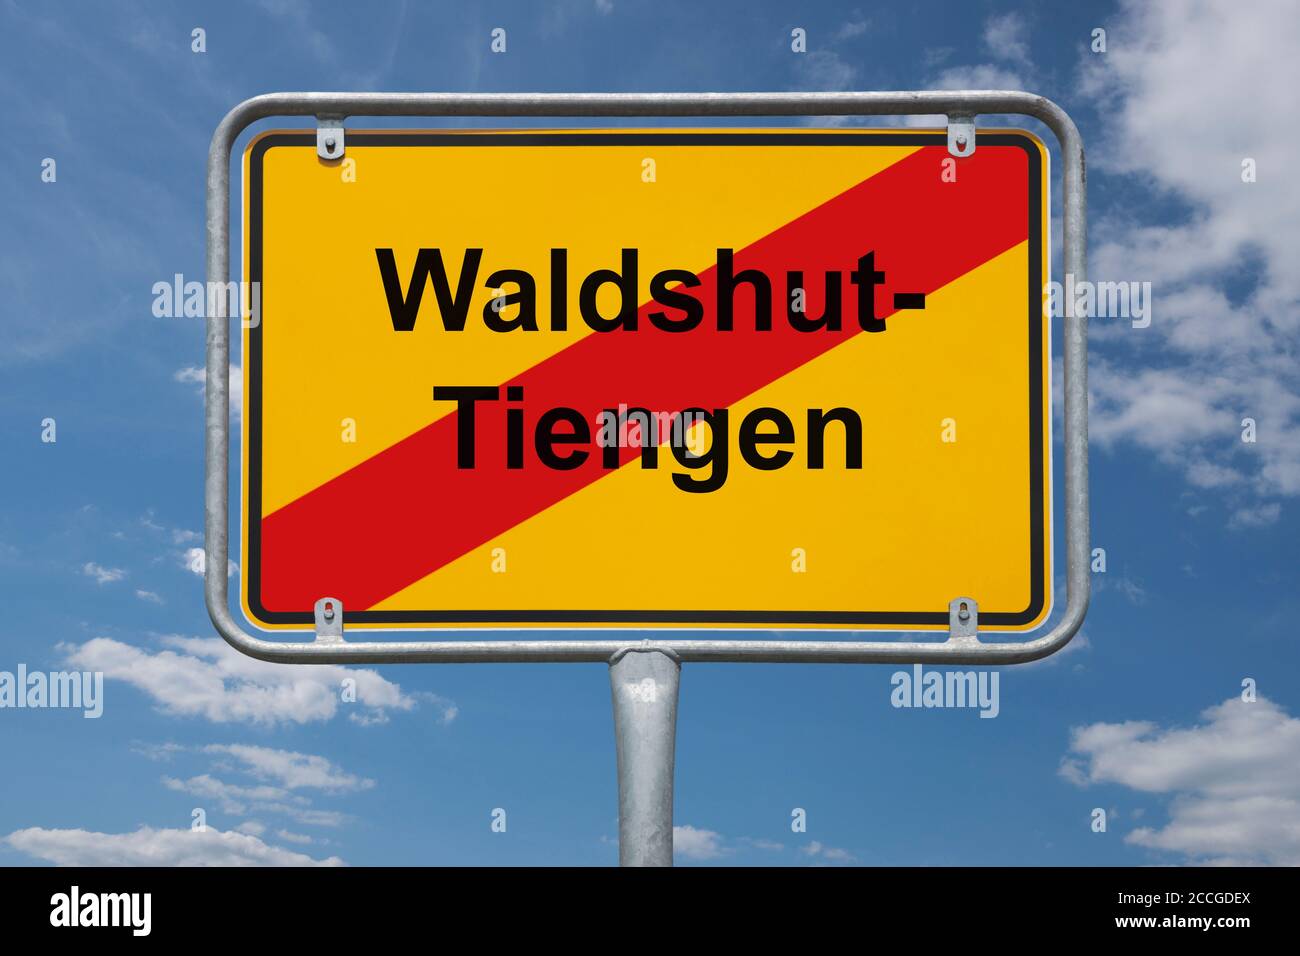 Waldshut Tiengen High Resolution Stock Photography and Images - Alamy